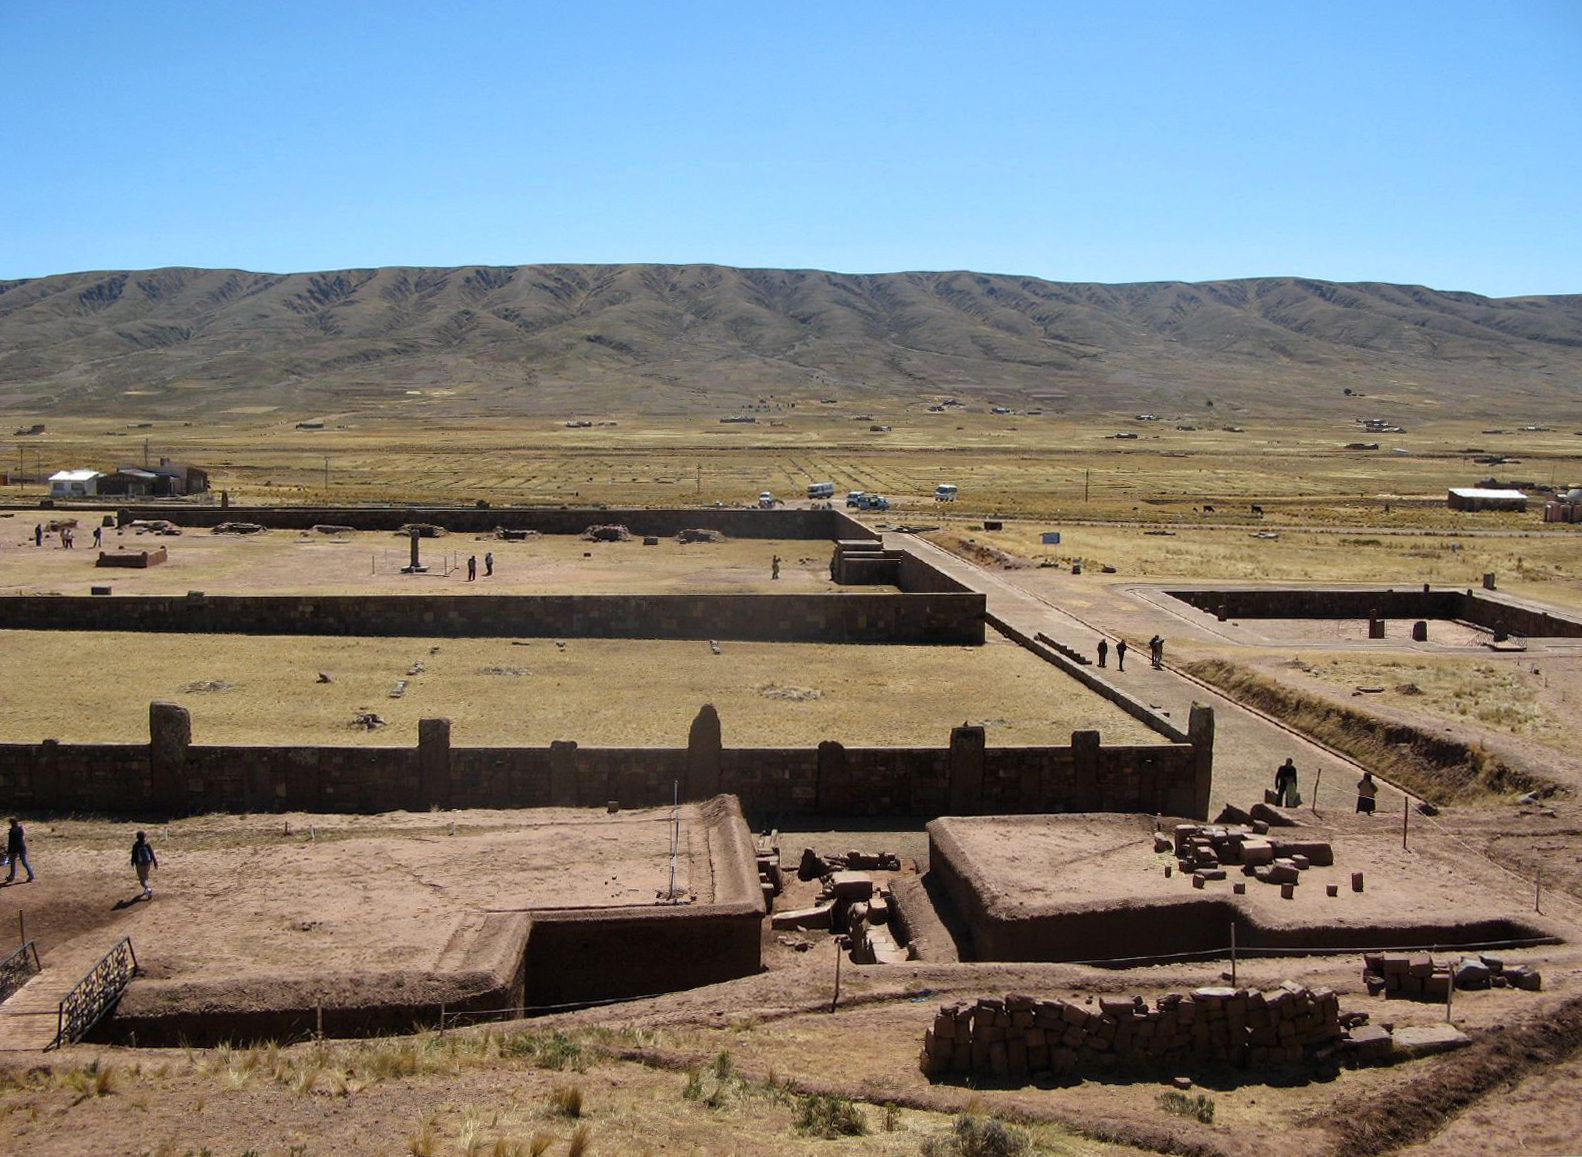 View of Tiwanaku with the Semi-subterranean Court to the right, Tiwanaku, Bolivia, 300–400 CE (photo: Fellipe Cicconi, CC BY-NC 2.0)